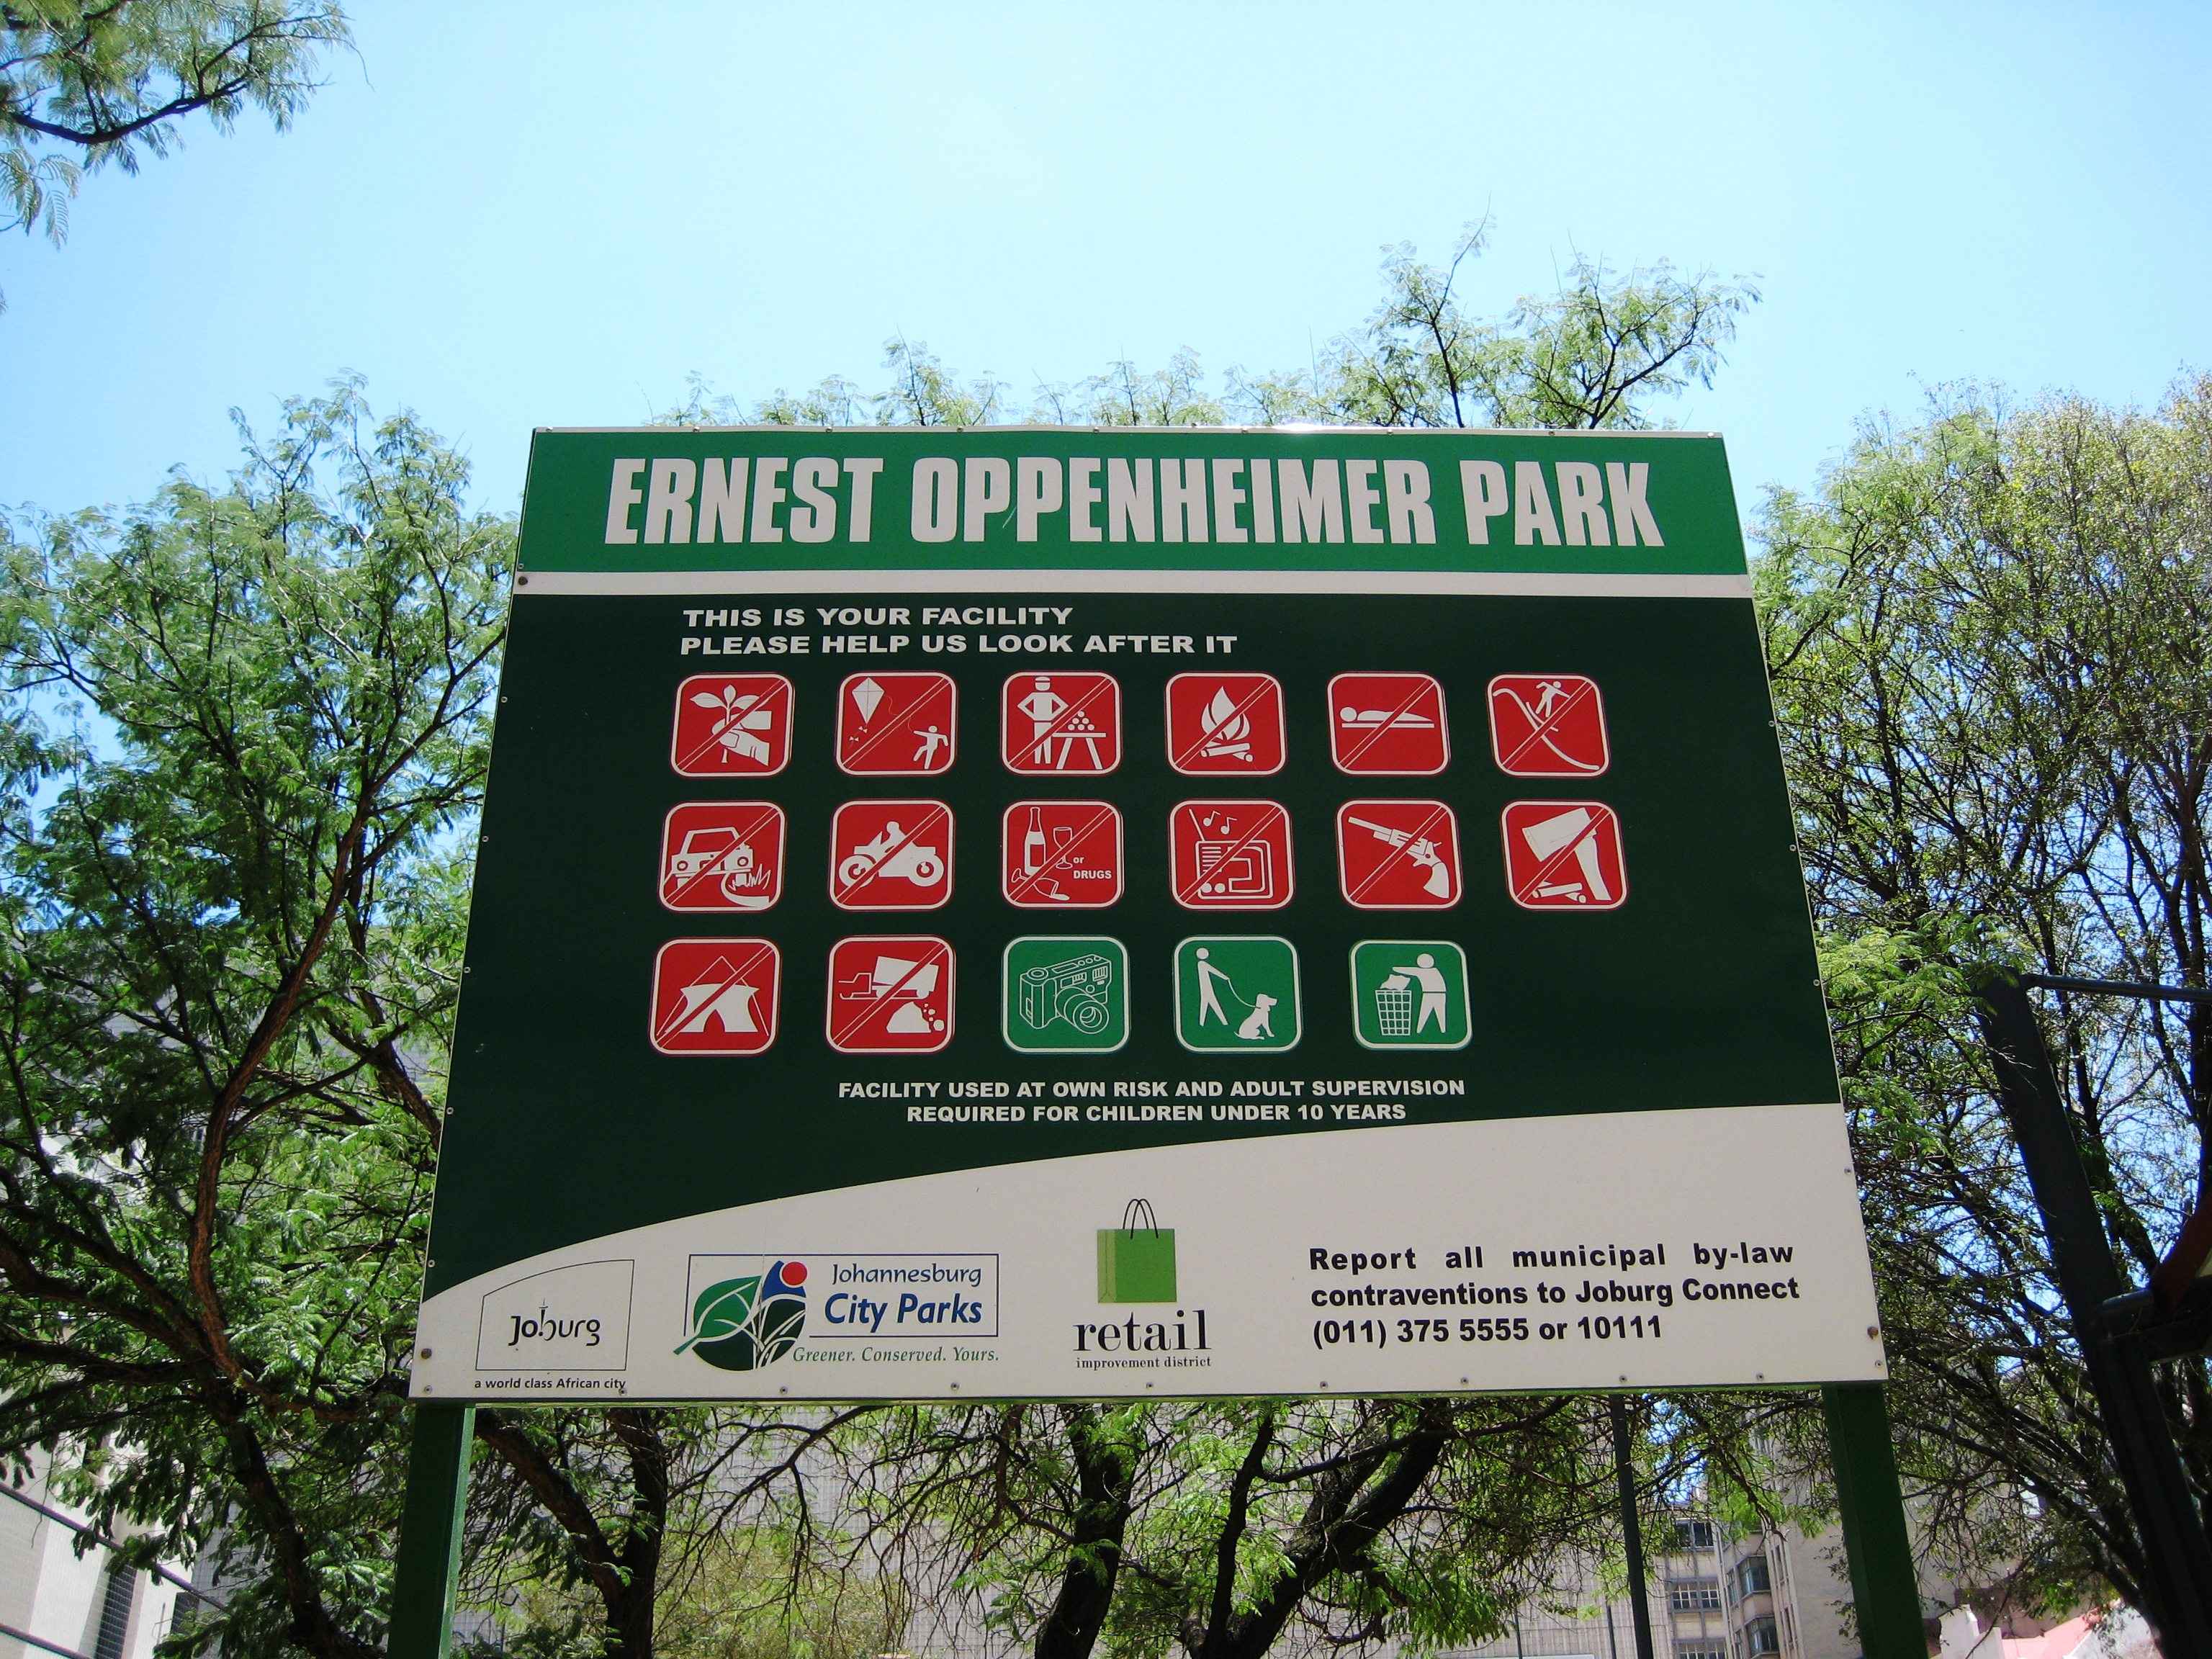 A sign in Ernest Oppenheimer park with pictograms indicating prohibited and encouraged behaviors